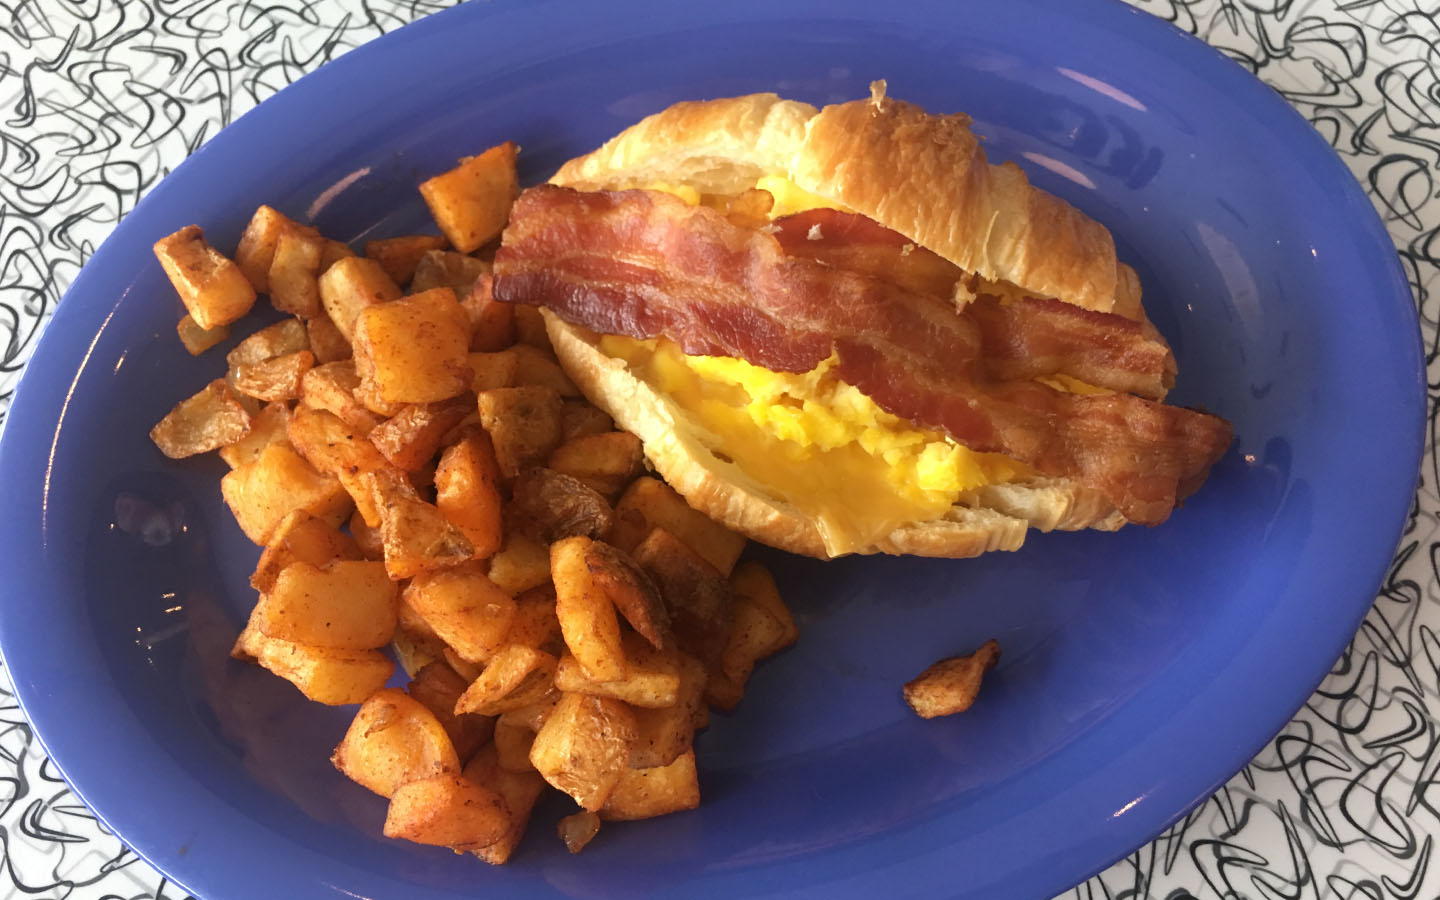 Bacon-Egg-Cheese Croissant from Bayliner Diner at Universal's Cabana Bay Beach Resort.